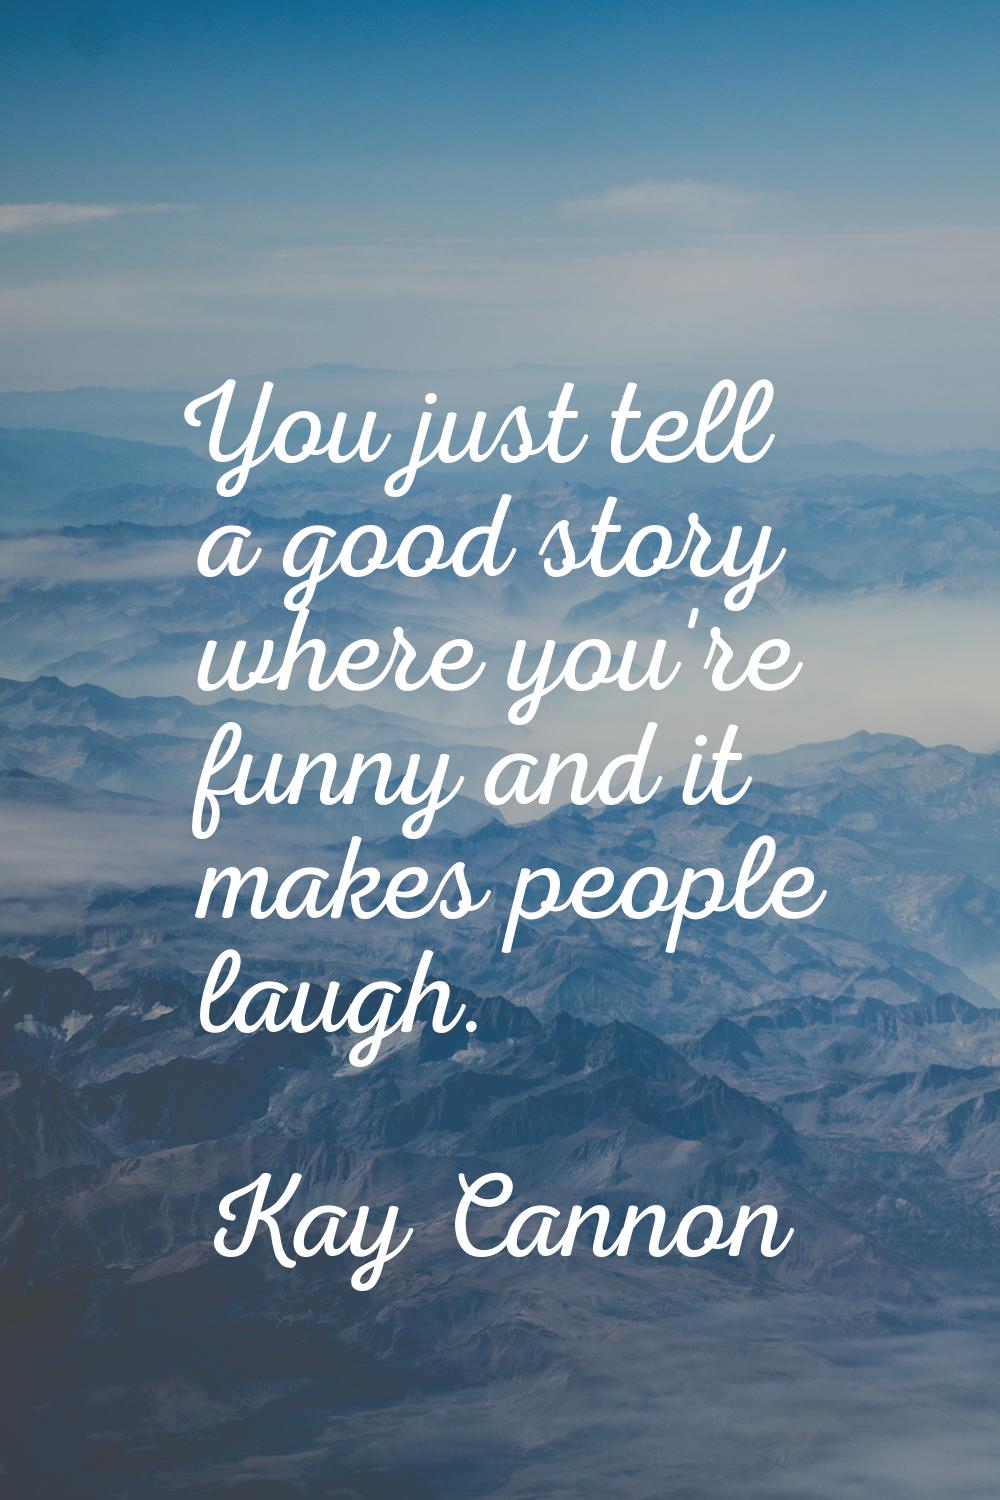 You just tell a good story where you're funny and it makes people laugh.